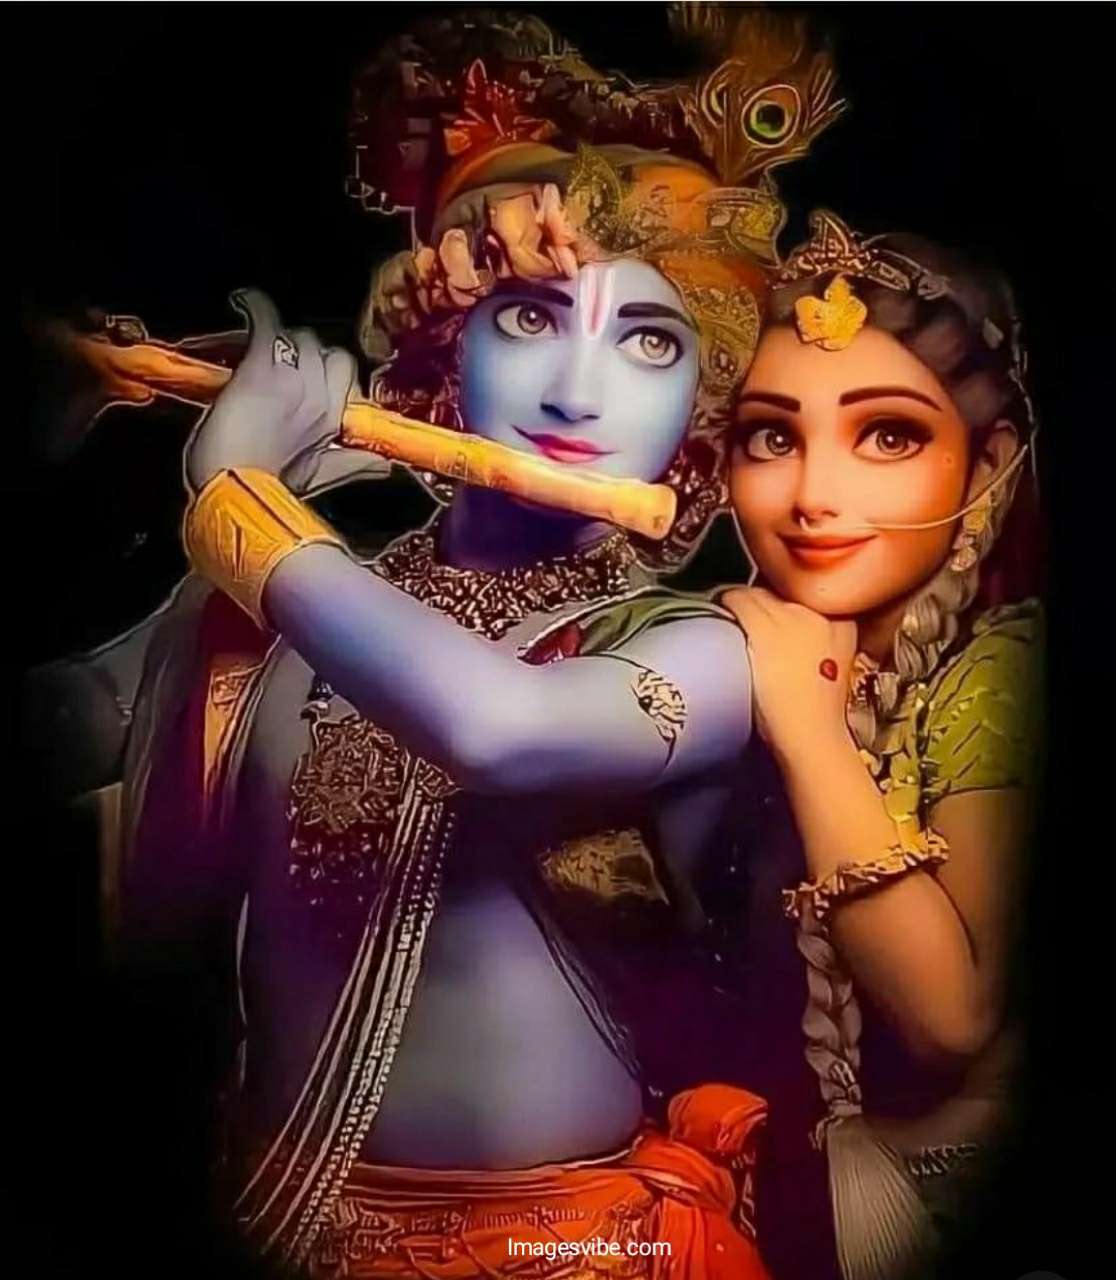 Best 30+ Beautiful Radha Krishna Images Download in 2023 - Images Vibe